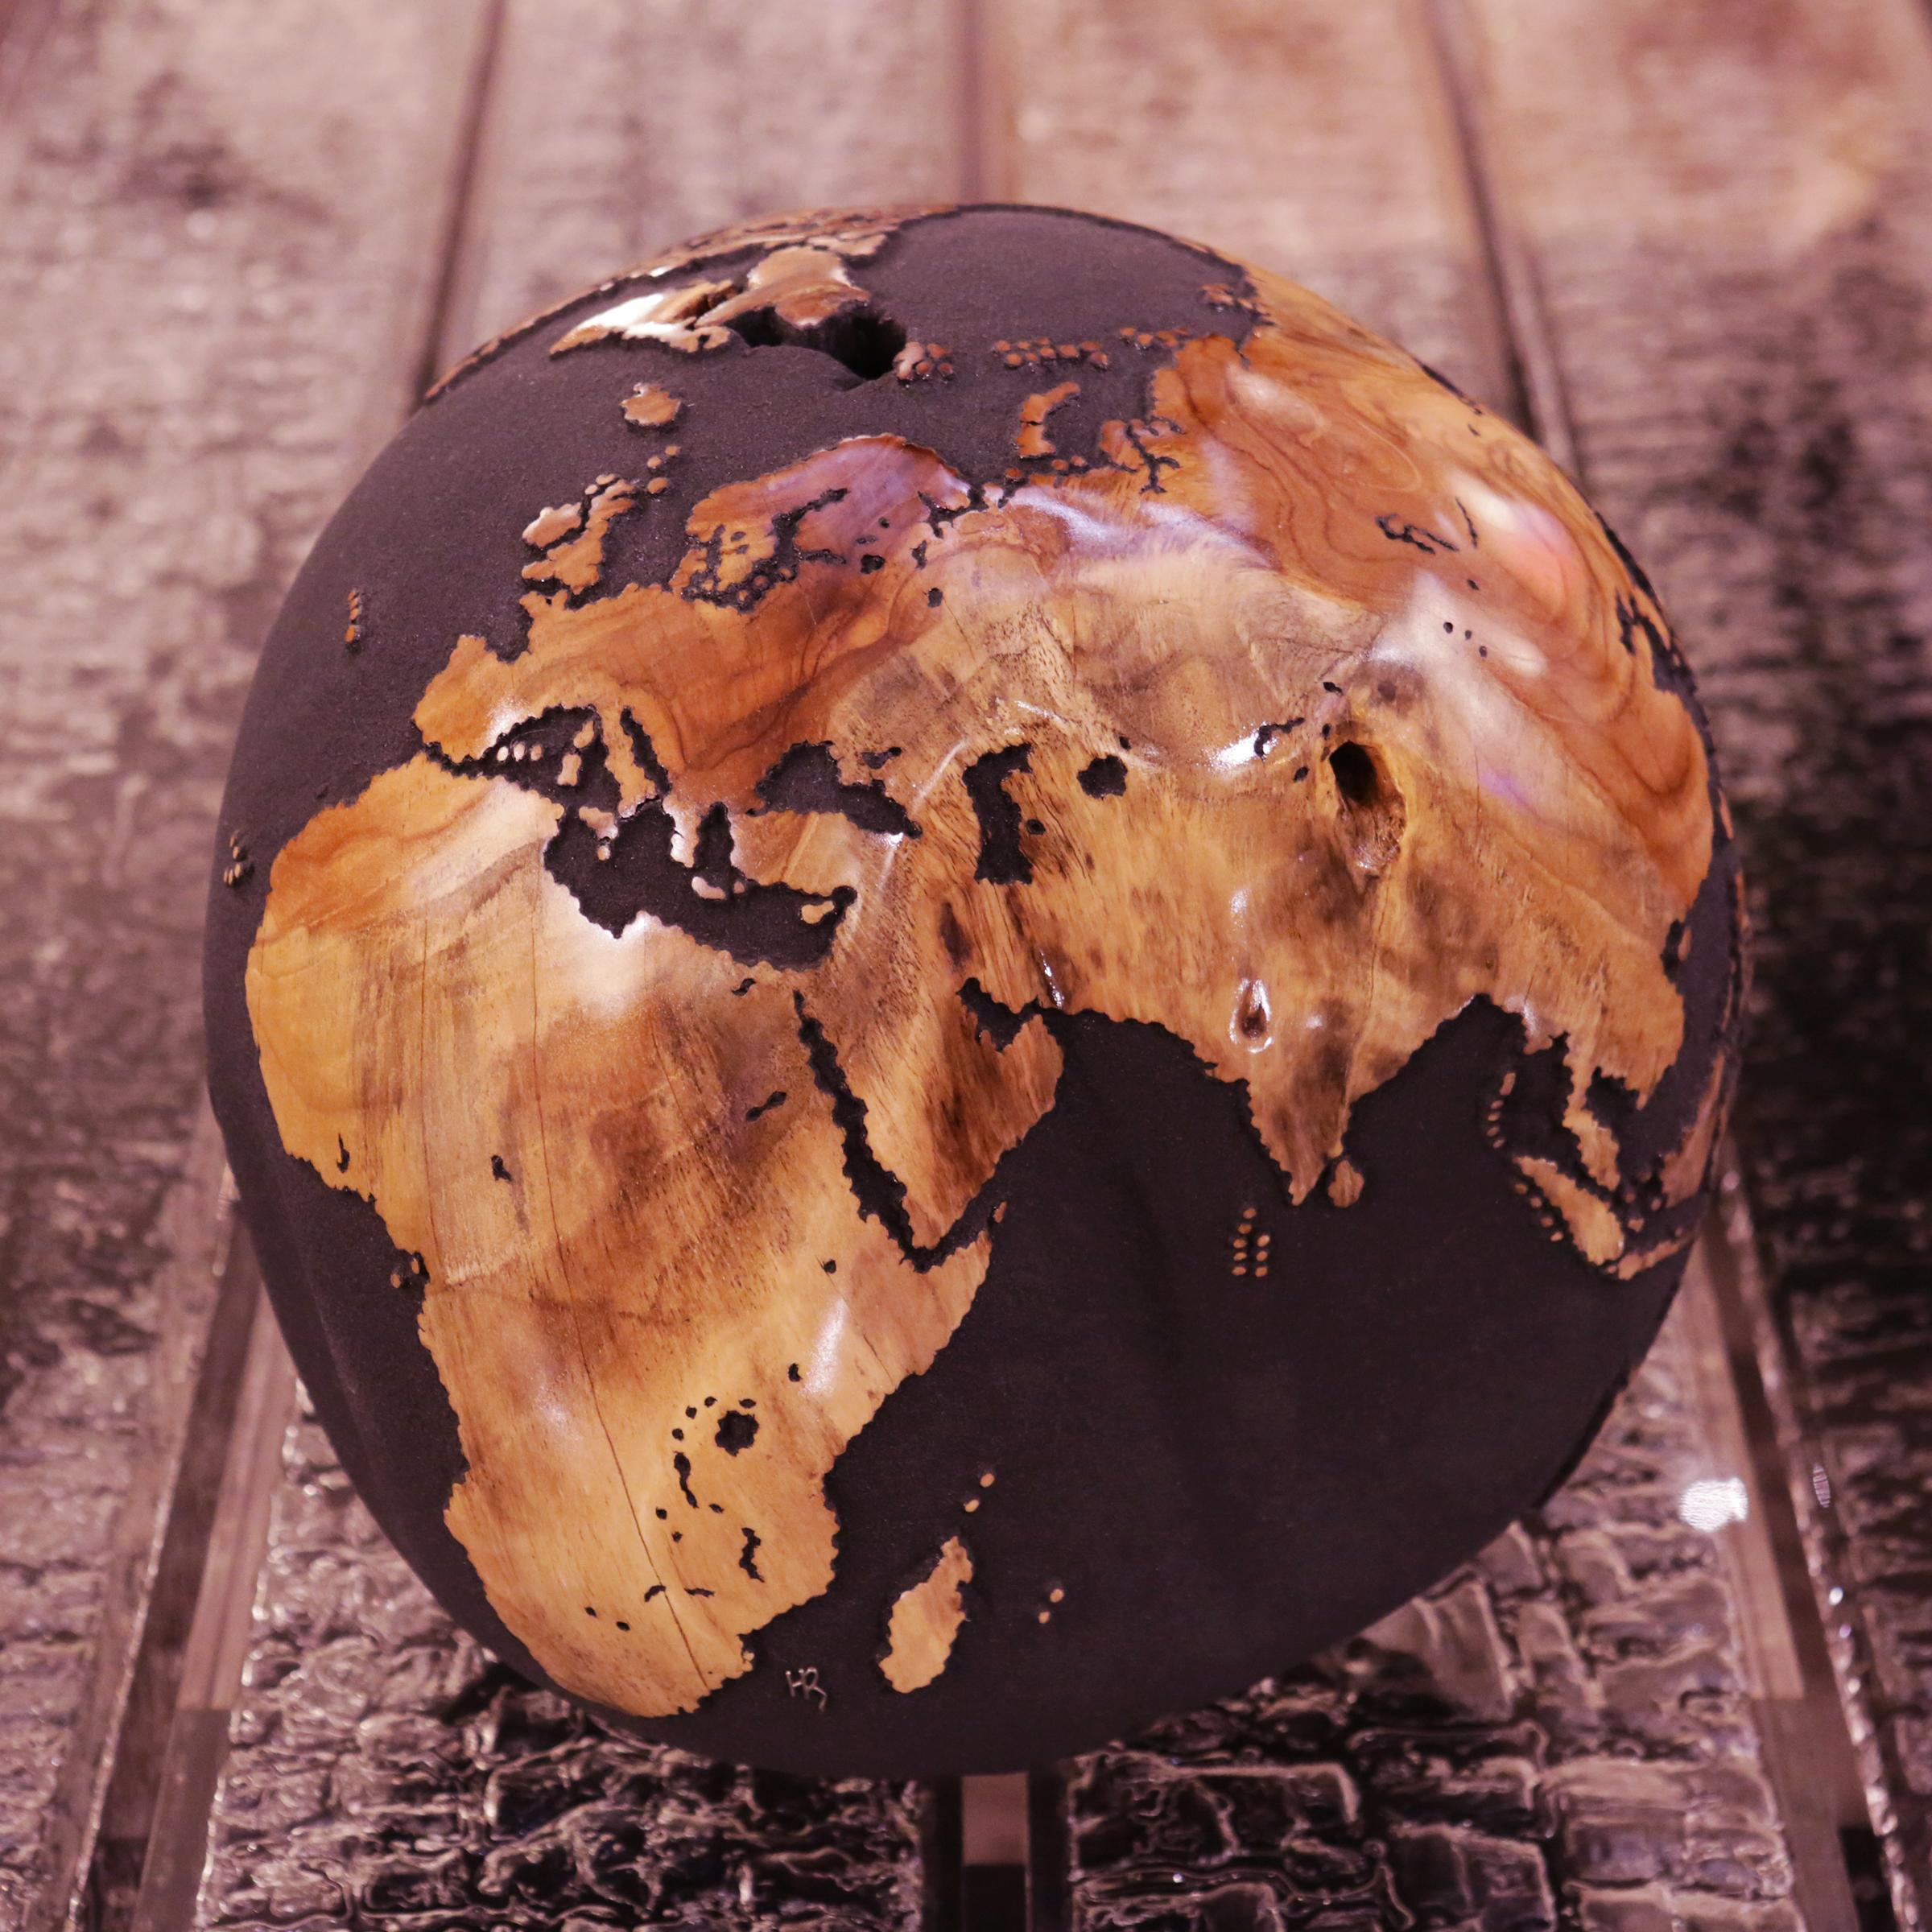 Sculpture globe earth volcanic powder and teak n°B
made of carved and varnished teak root and composed
of black sand of volcanic rock, on swivel base.